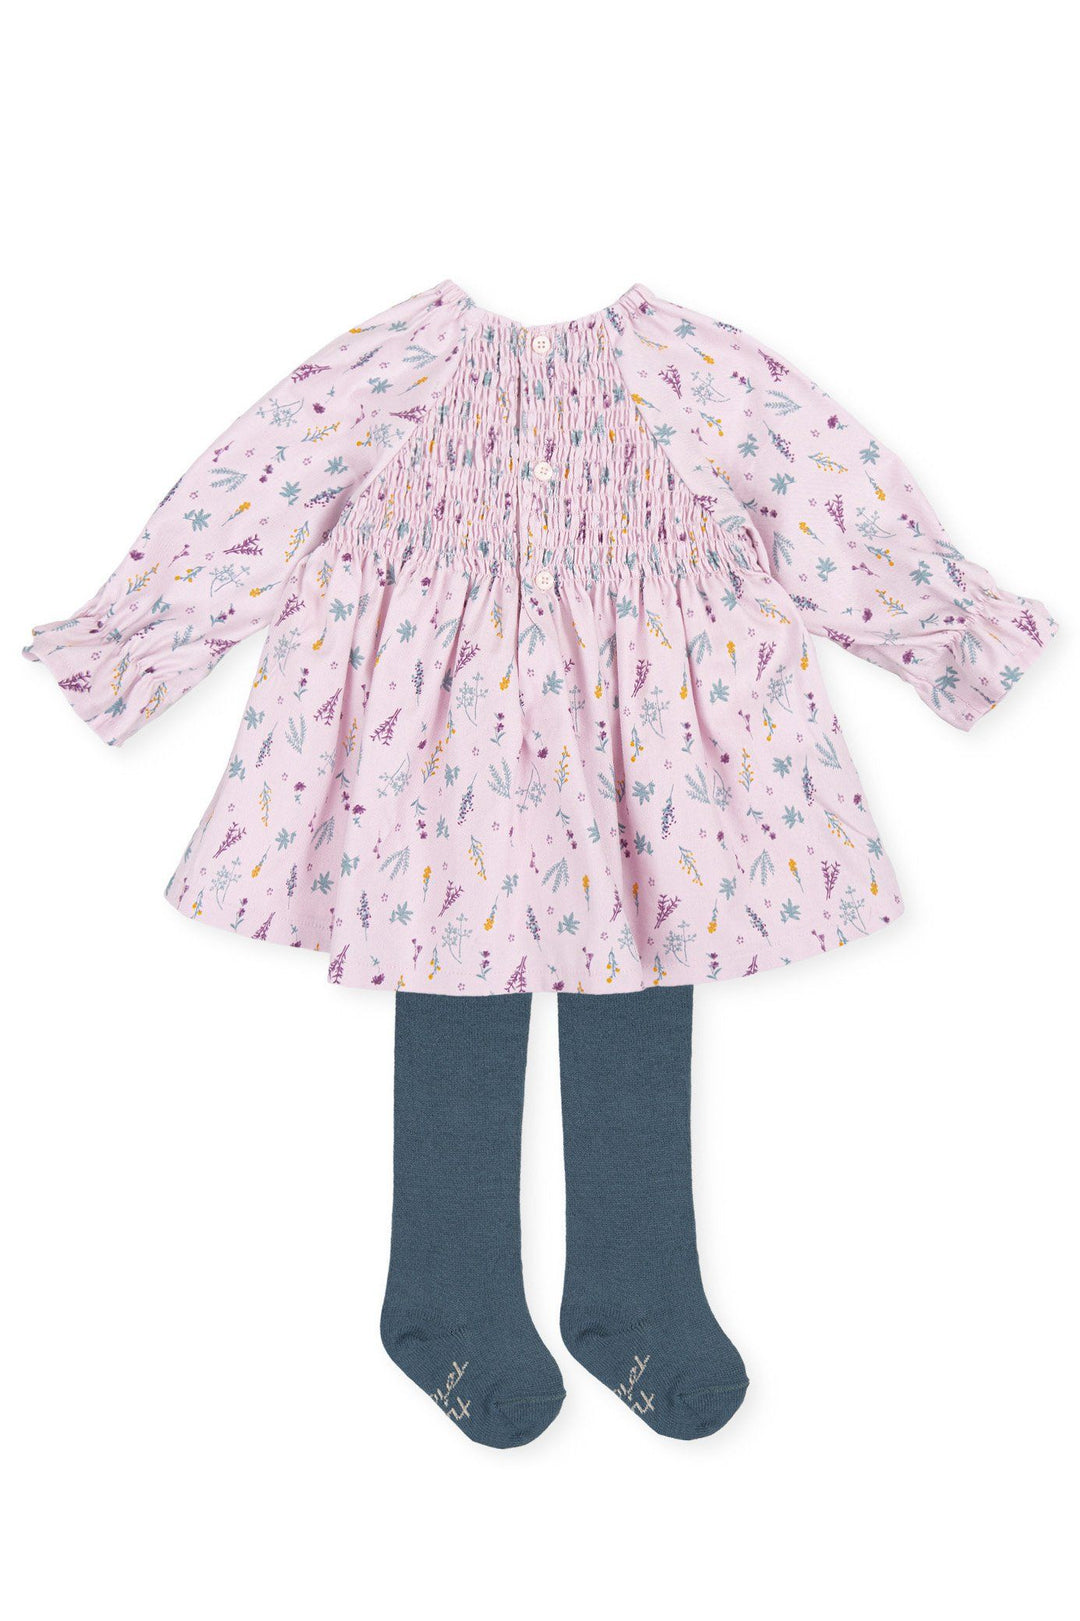 Tutto Piccolo "Nancy" Lilac Floral Dress & Tights | Millie and John